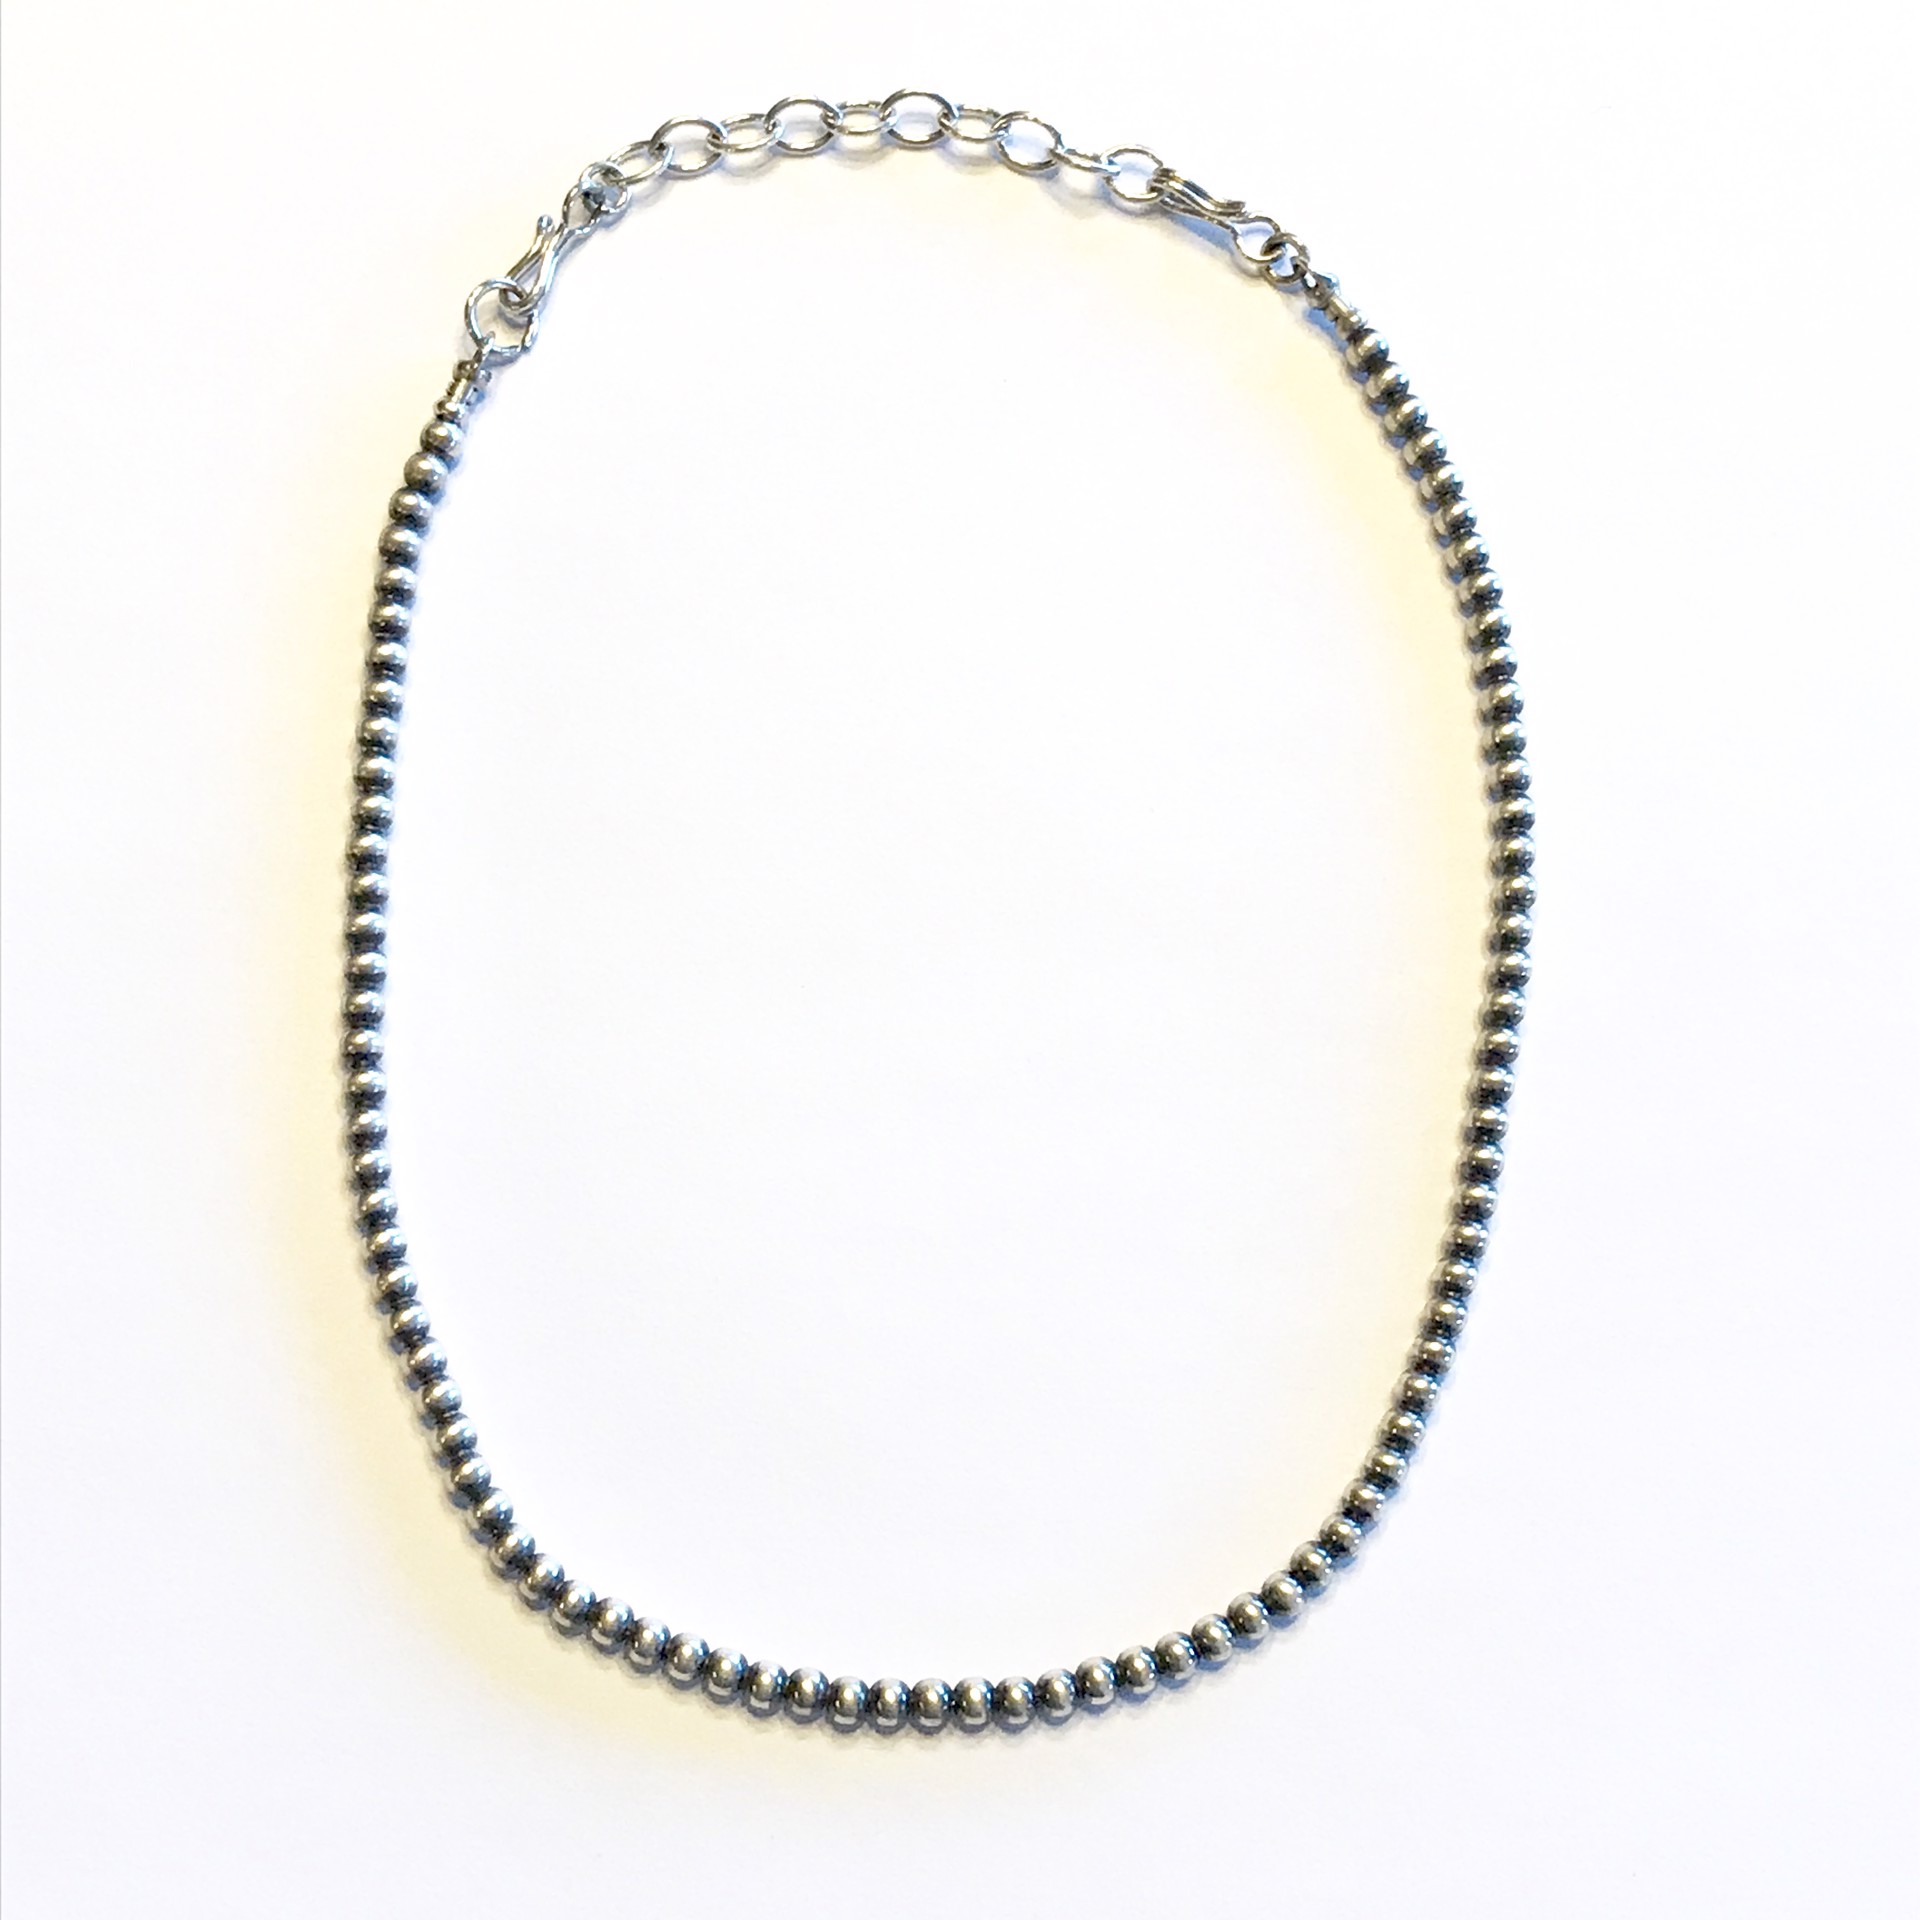 Necklace - 14"-16" Antiqued Sterling Silver Beads 4mm by Dan Dodson